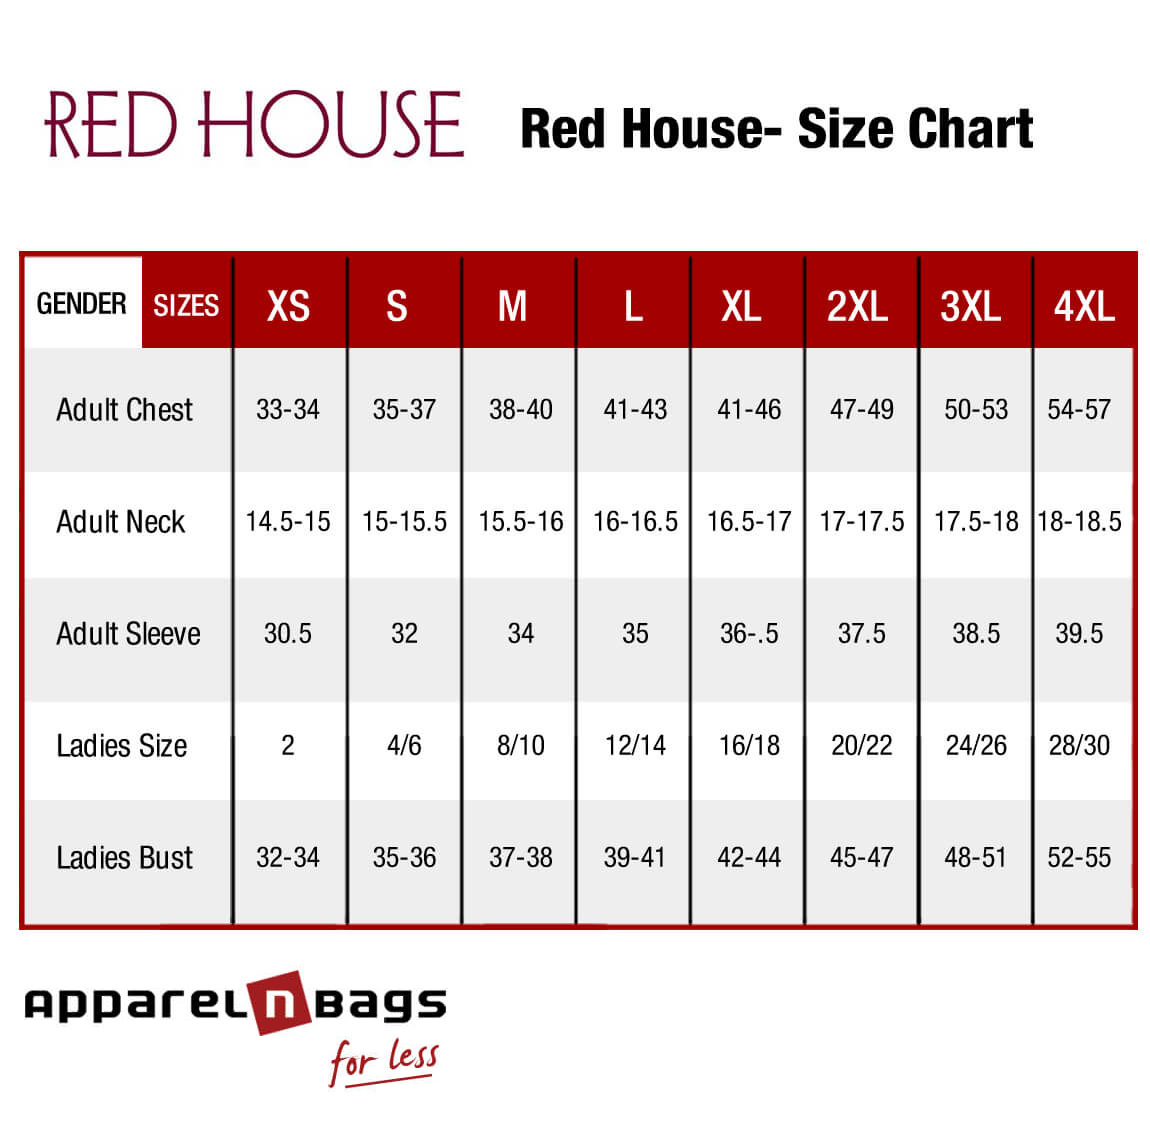 Red House - Size Chart